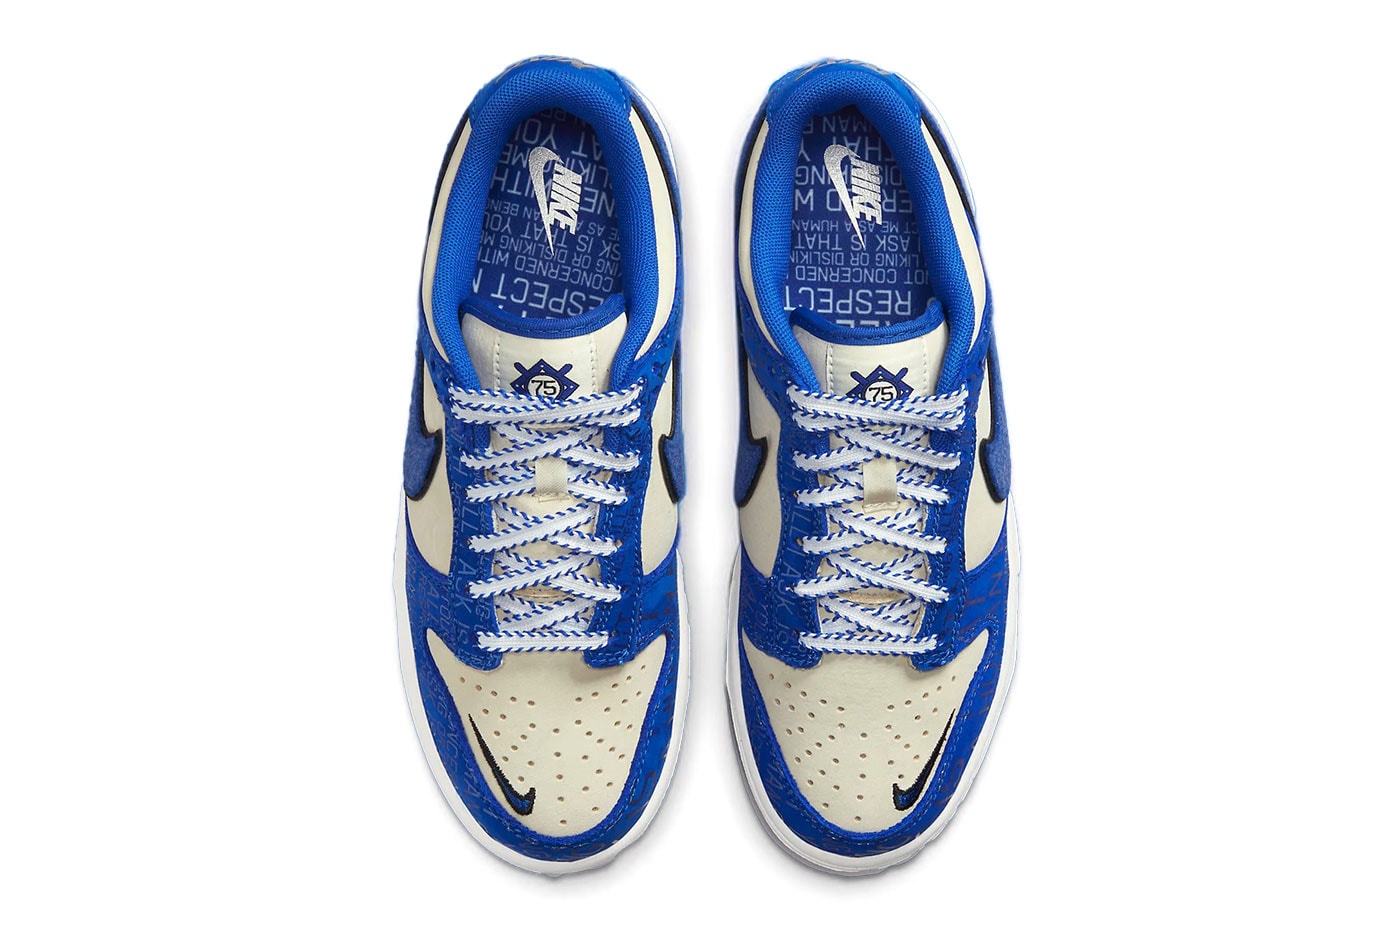 Nike Dunk Low Jackie Robinson MLB dodgers rookie of the year league mvp world series 75 years breaking barriers first african american player release info date